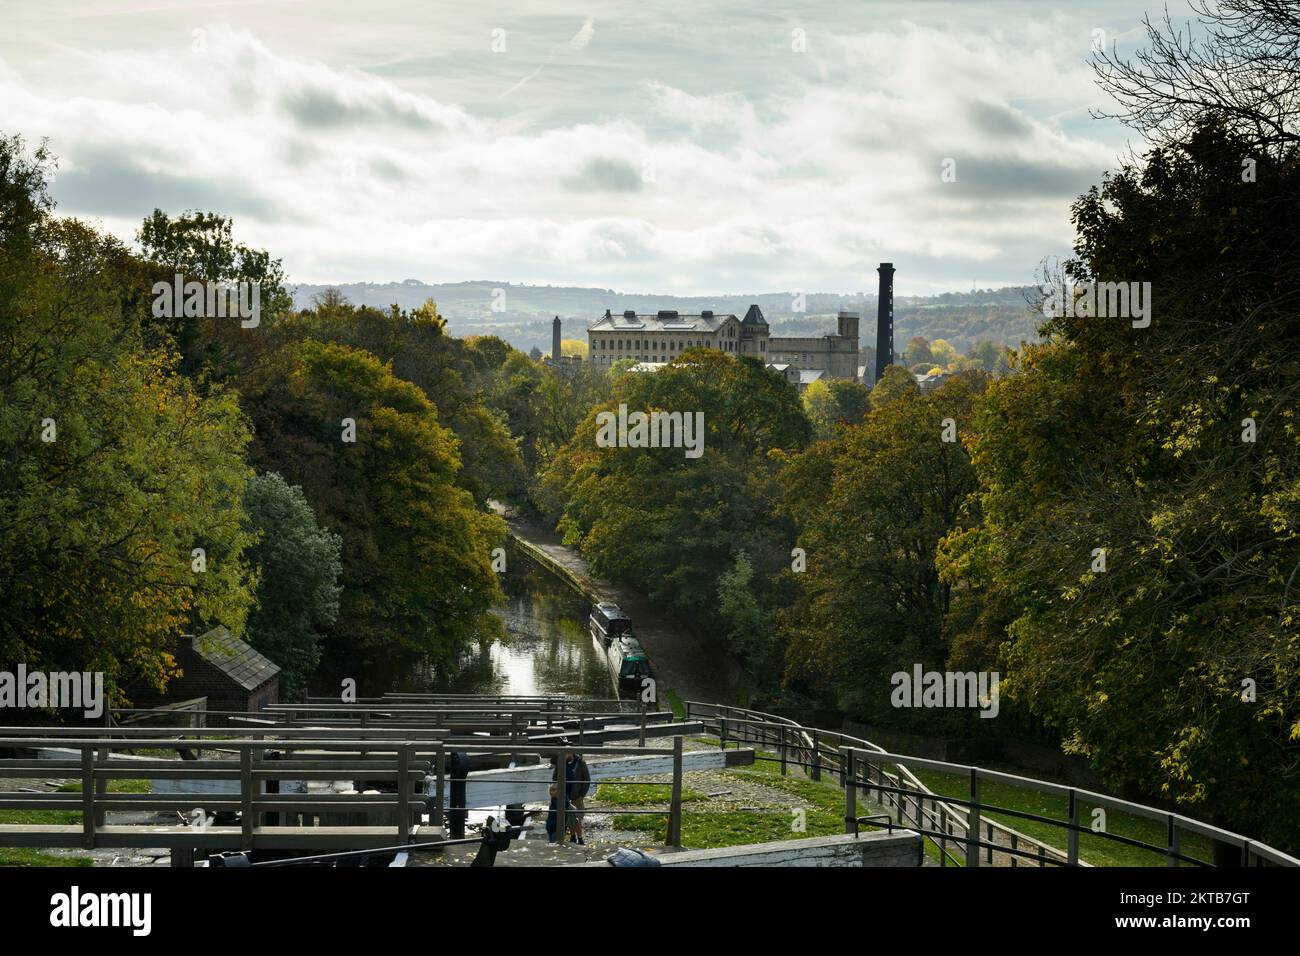 2 people by lock gates, boats moored, sunlit Damart mill, autumn colour - Bingley Five Rise Locks, Leeds & Liverpool Canal, West Yorkshire England UK. Stock Photo